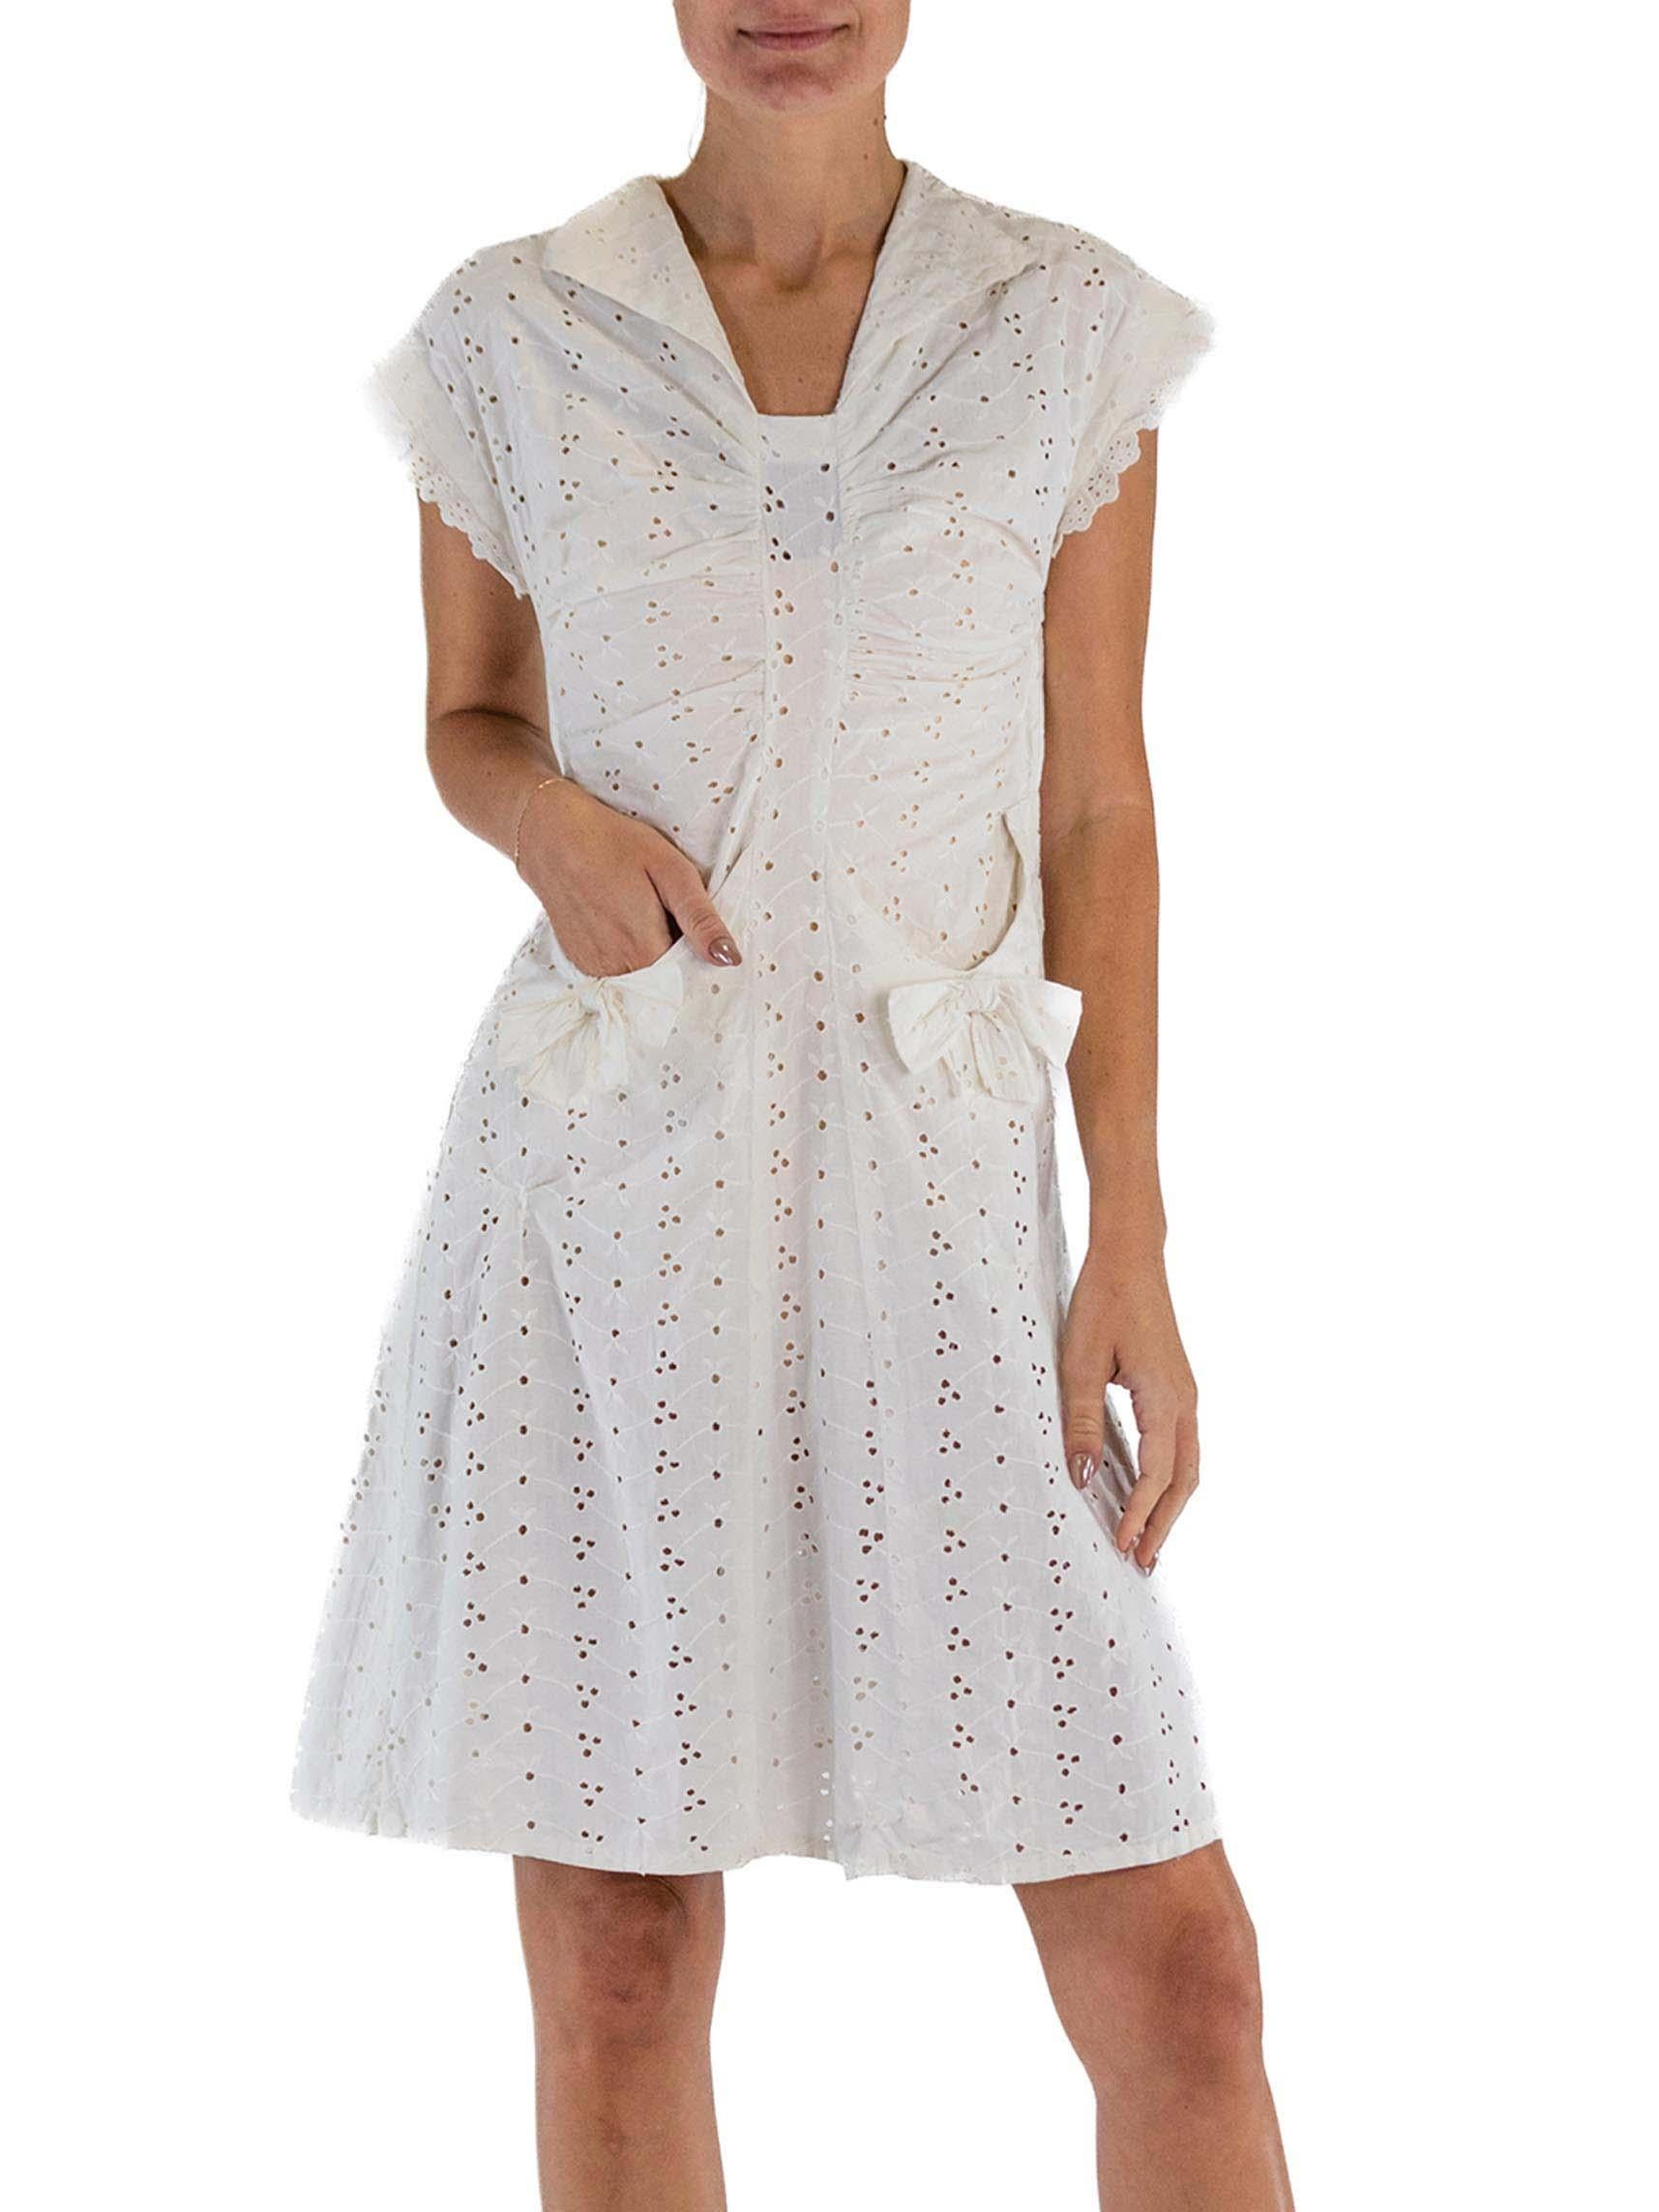 1930S White Cotton Eyelet Lace Cute Little Dress With Bow Pockets For Sale 3